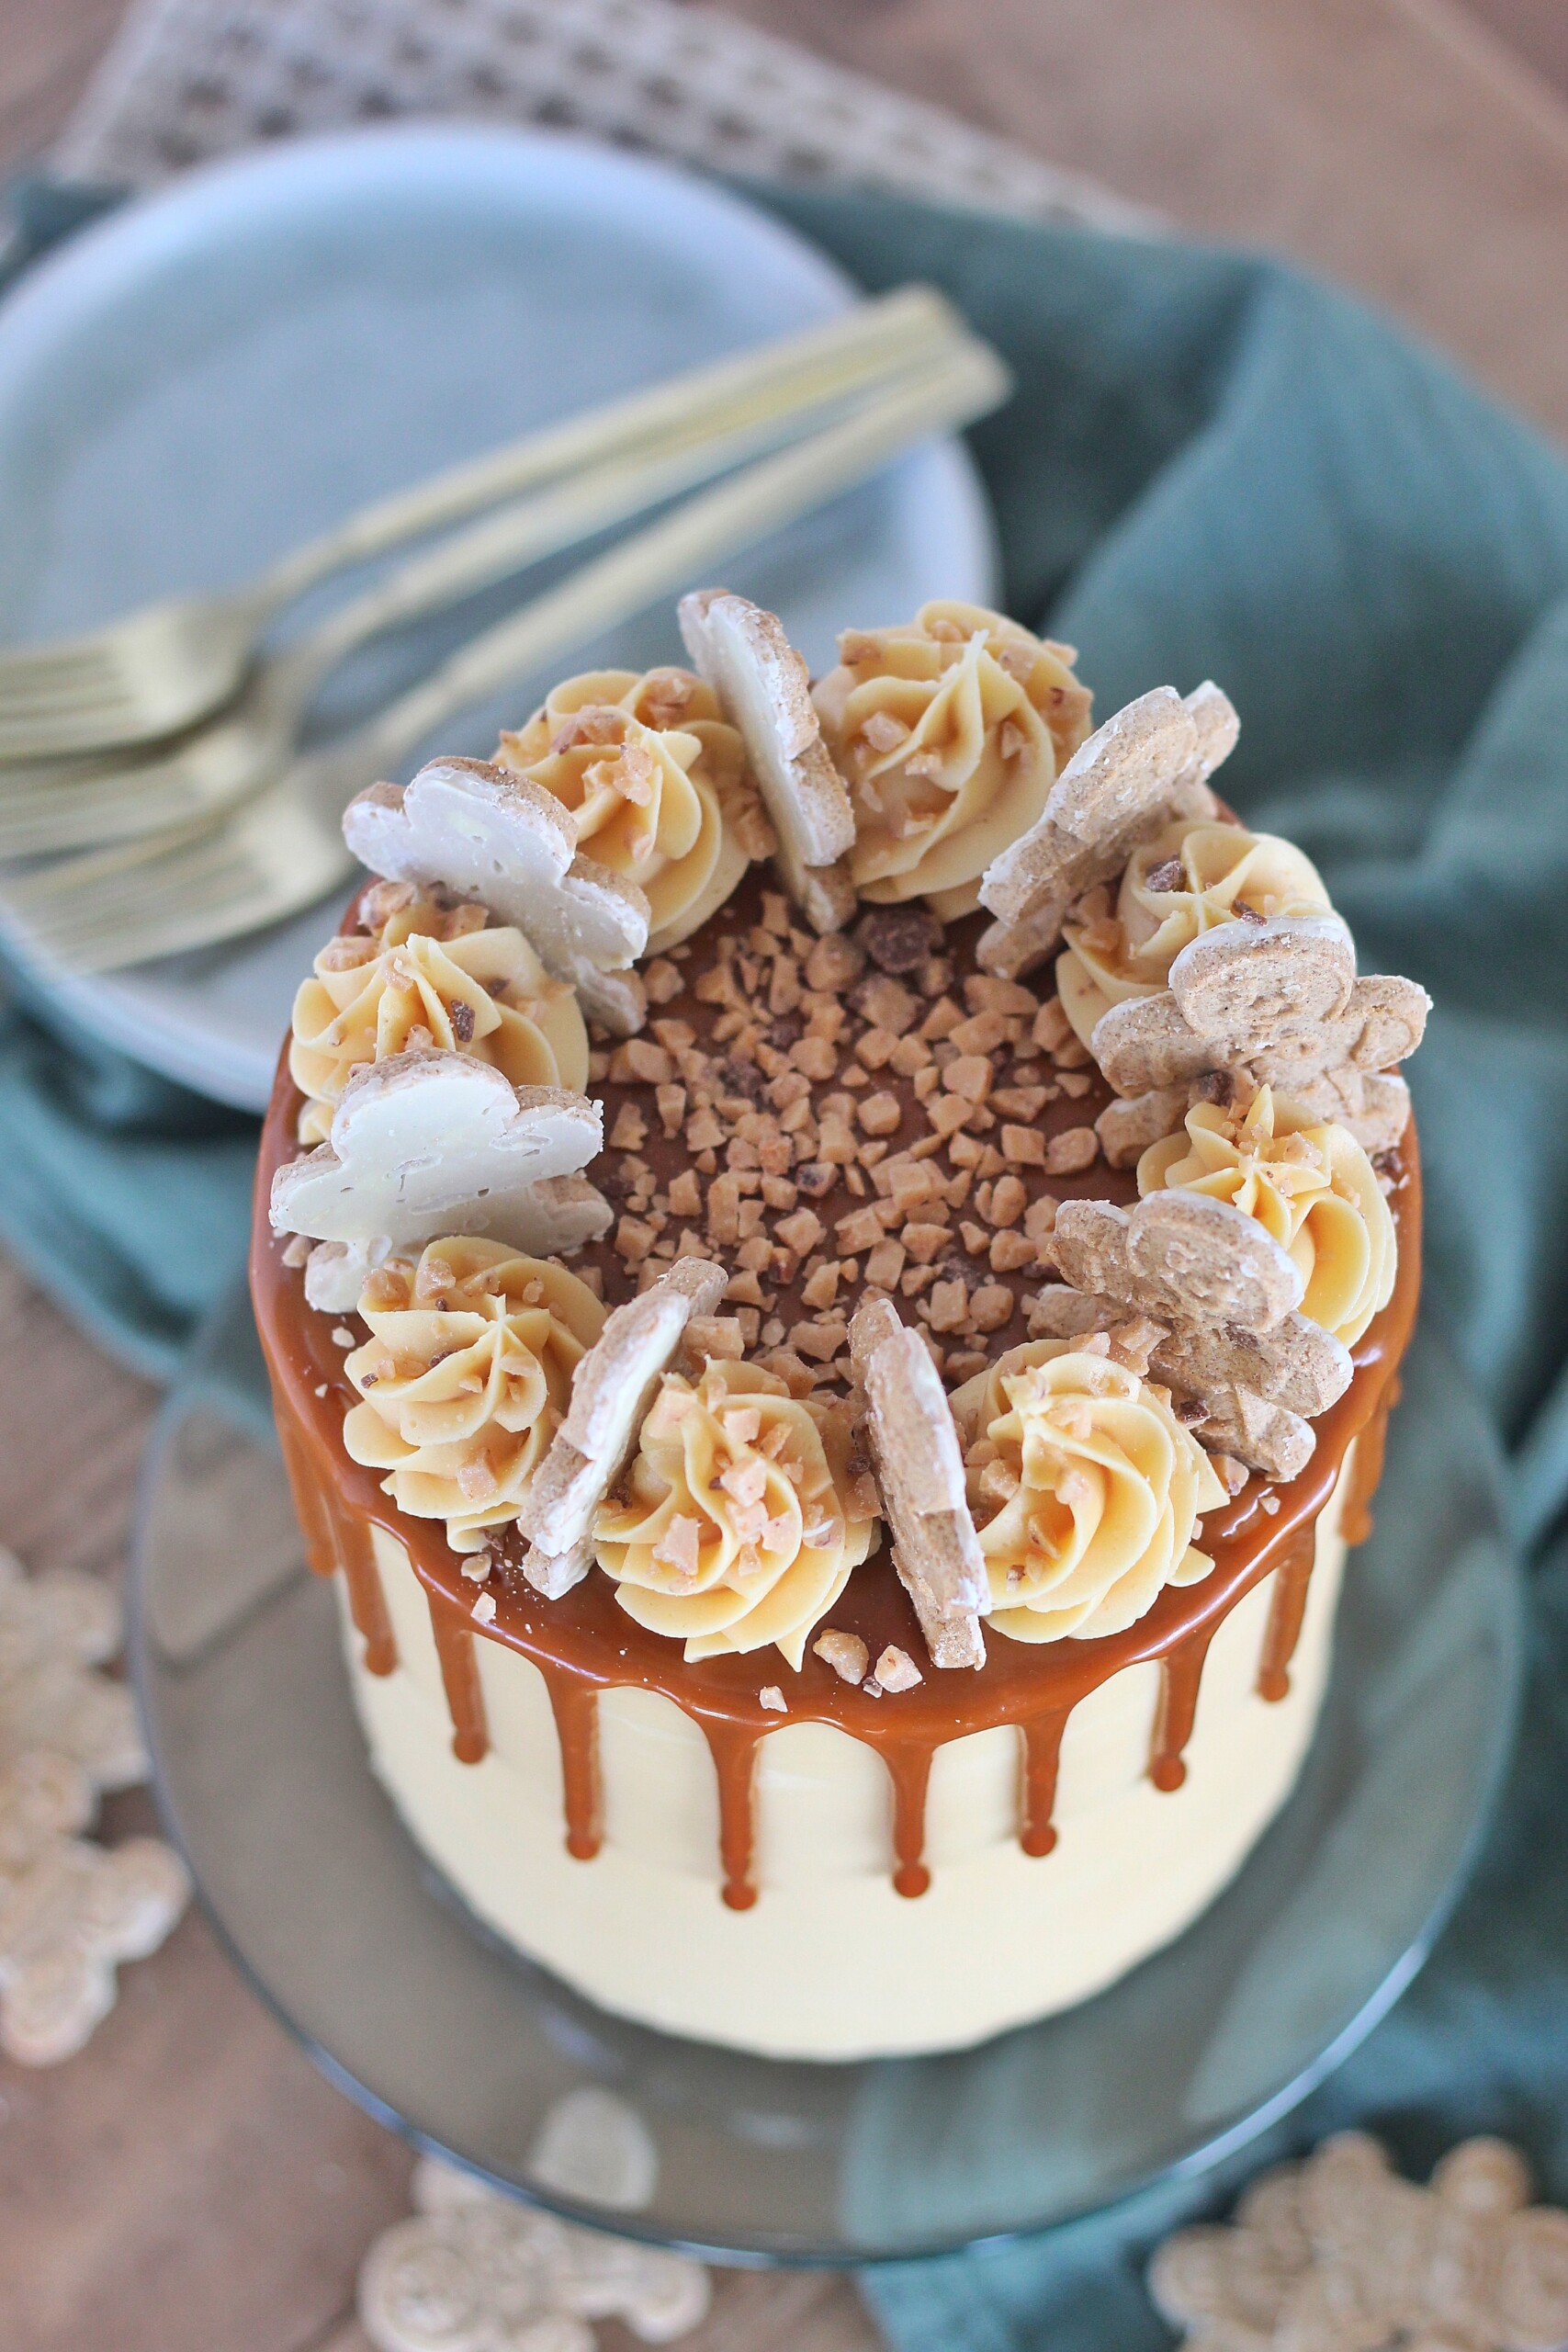 Swirls of caramel buttercream, caramel drip and toffee bits covering tender and moist gingerbread cake layers